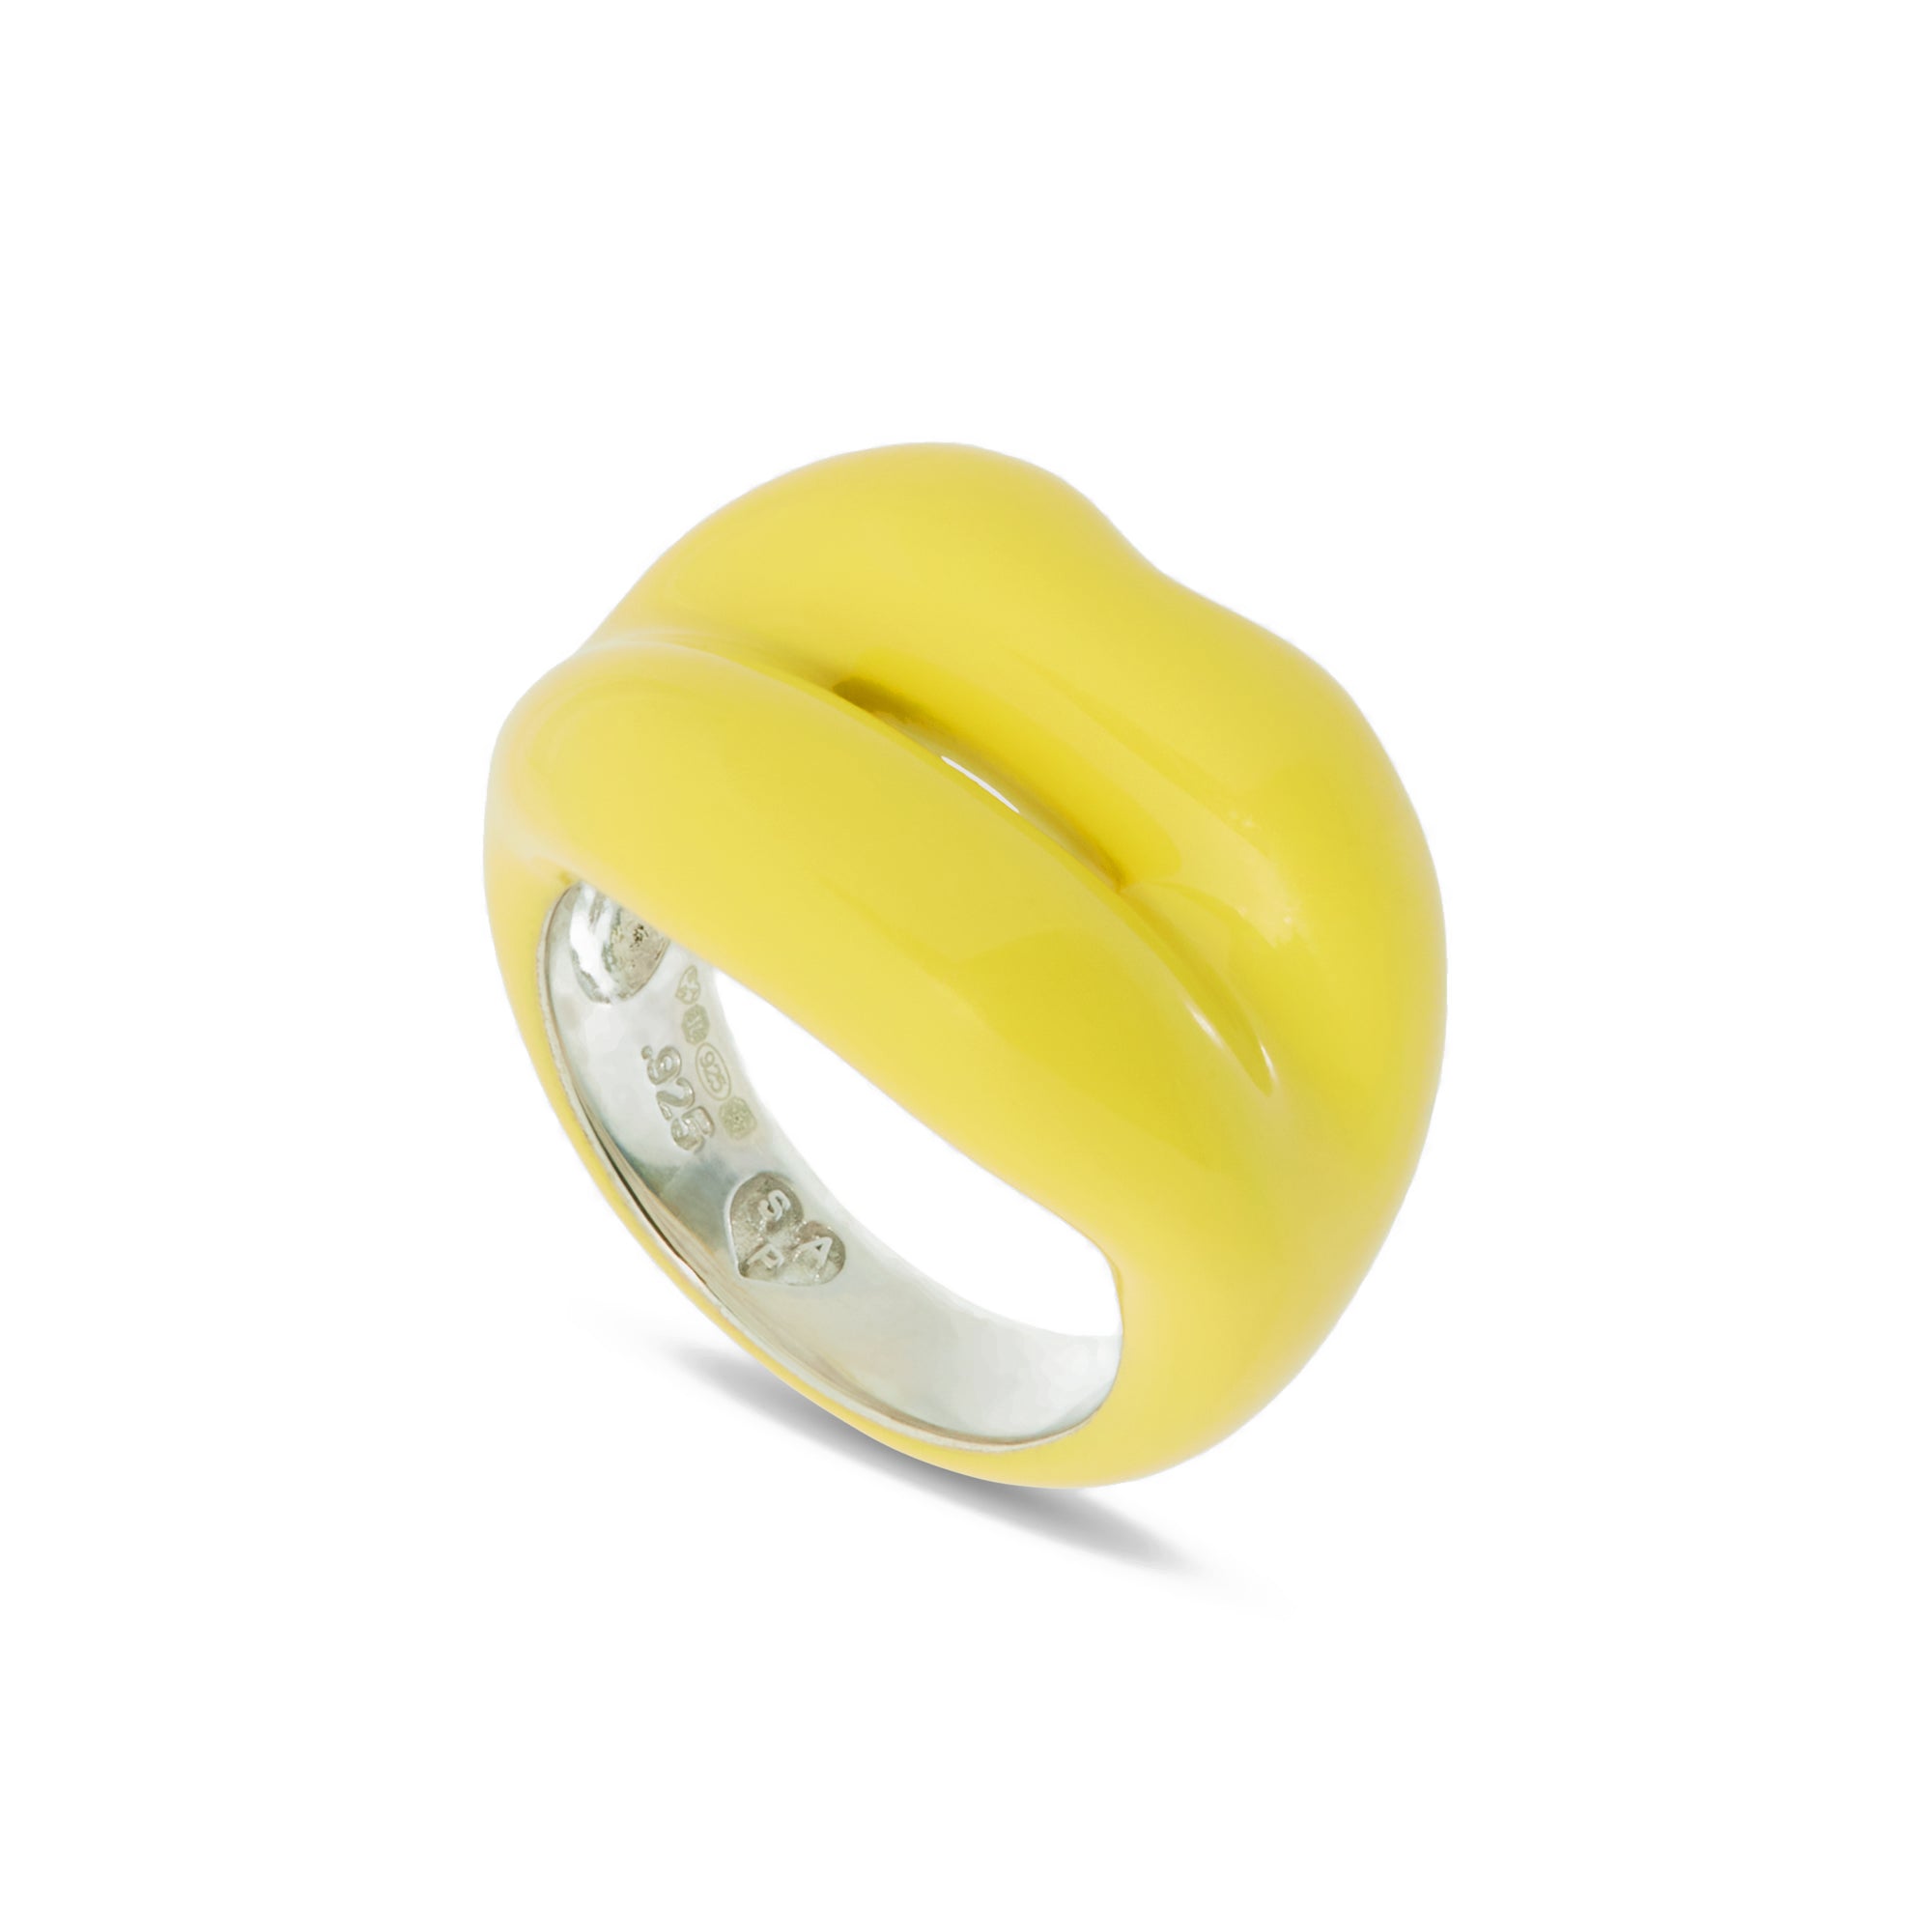 Solange - Hotlips Ring in Pastel Yellow view 3